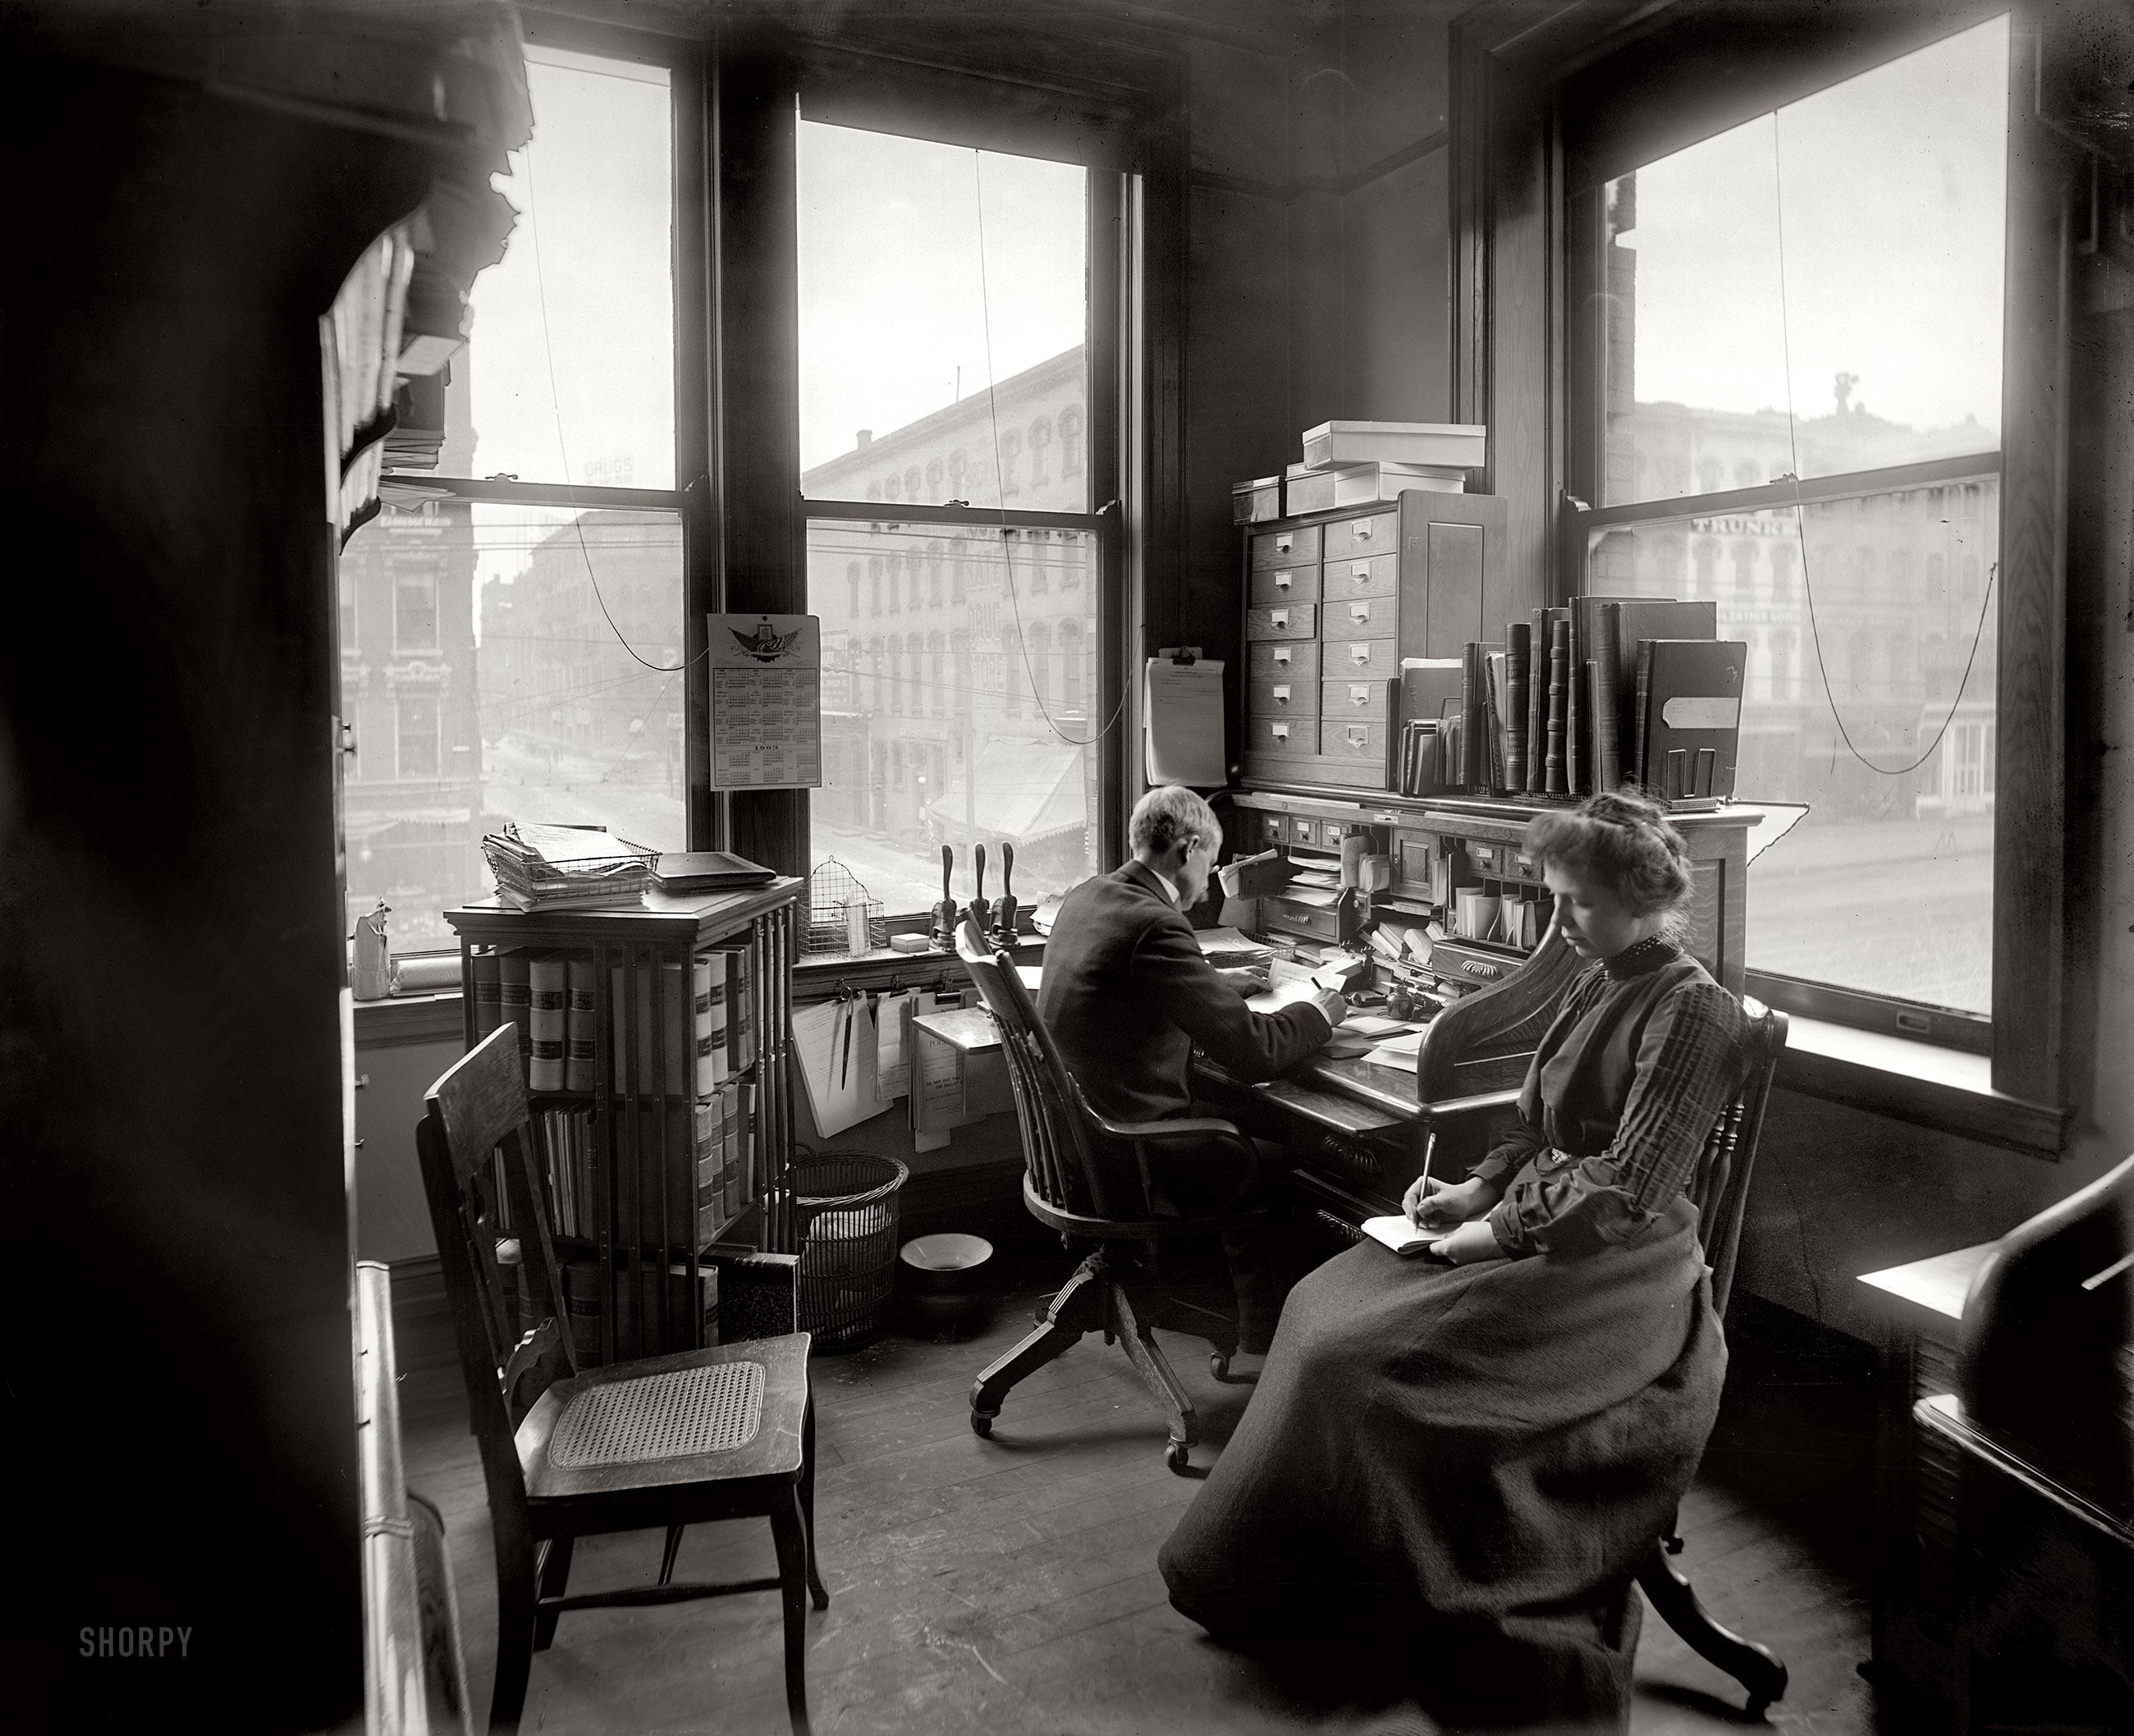 Circa 1902. "Richmond & Backus Co. office, Detroit." Our sixth glimpse behind the scenes at this printing, binding and office supply business. View full size.